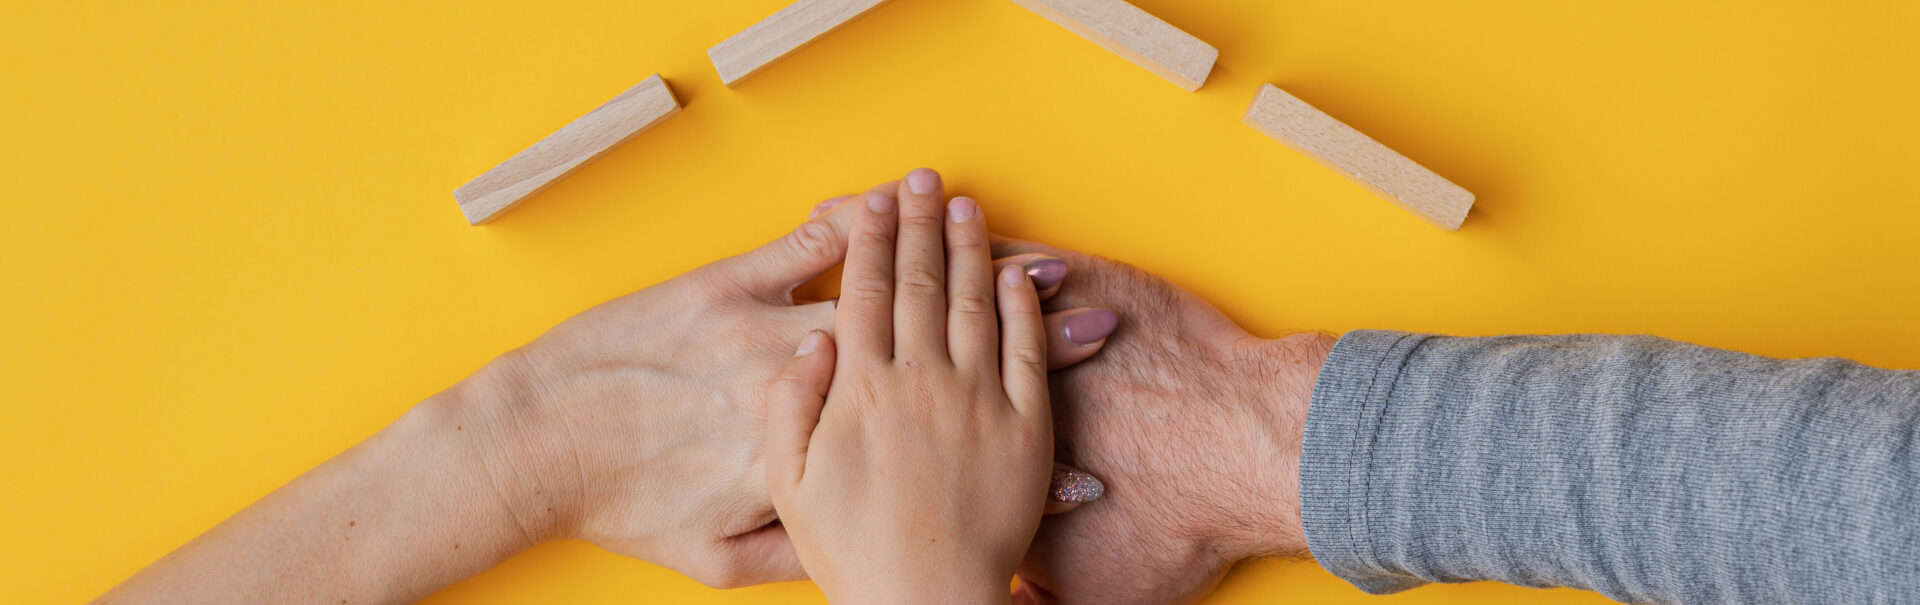 Family Stacking Their Hand On Yellow Background With Roof Made O